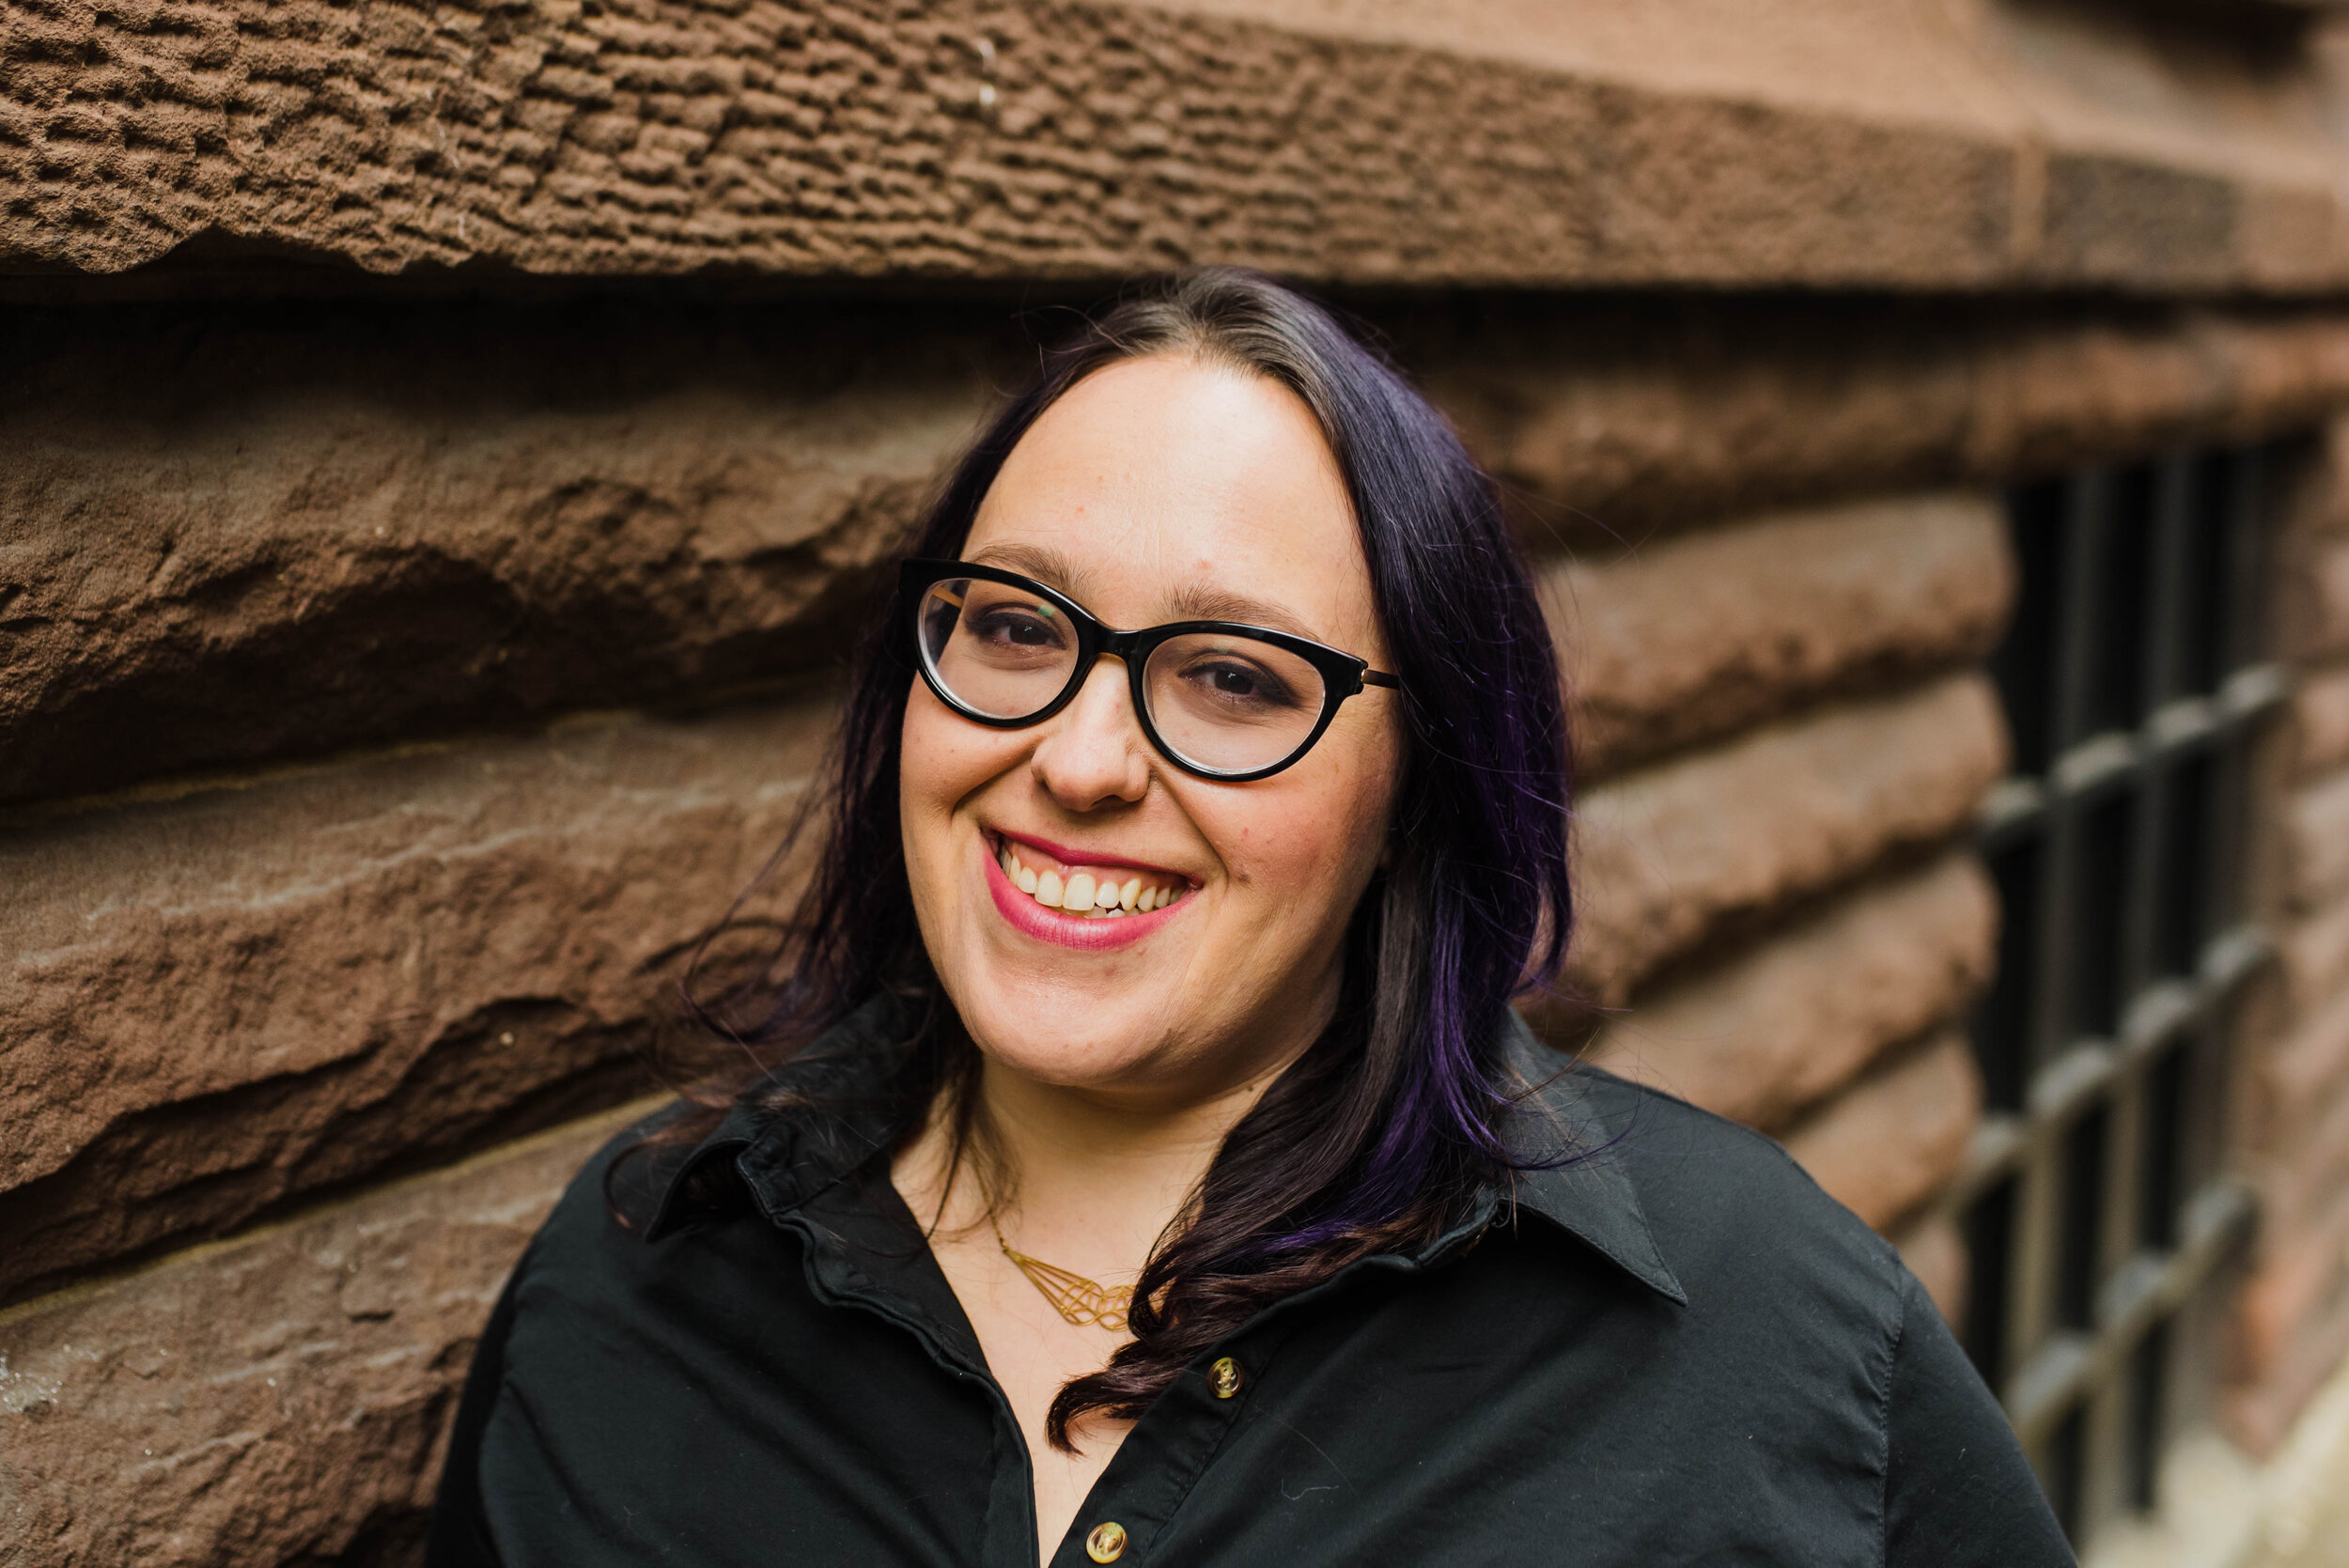 Writer Tamar needed some updated headshots for her job, but she also wanted to show off her killer purple hair!